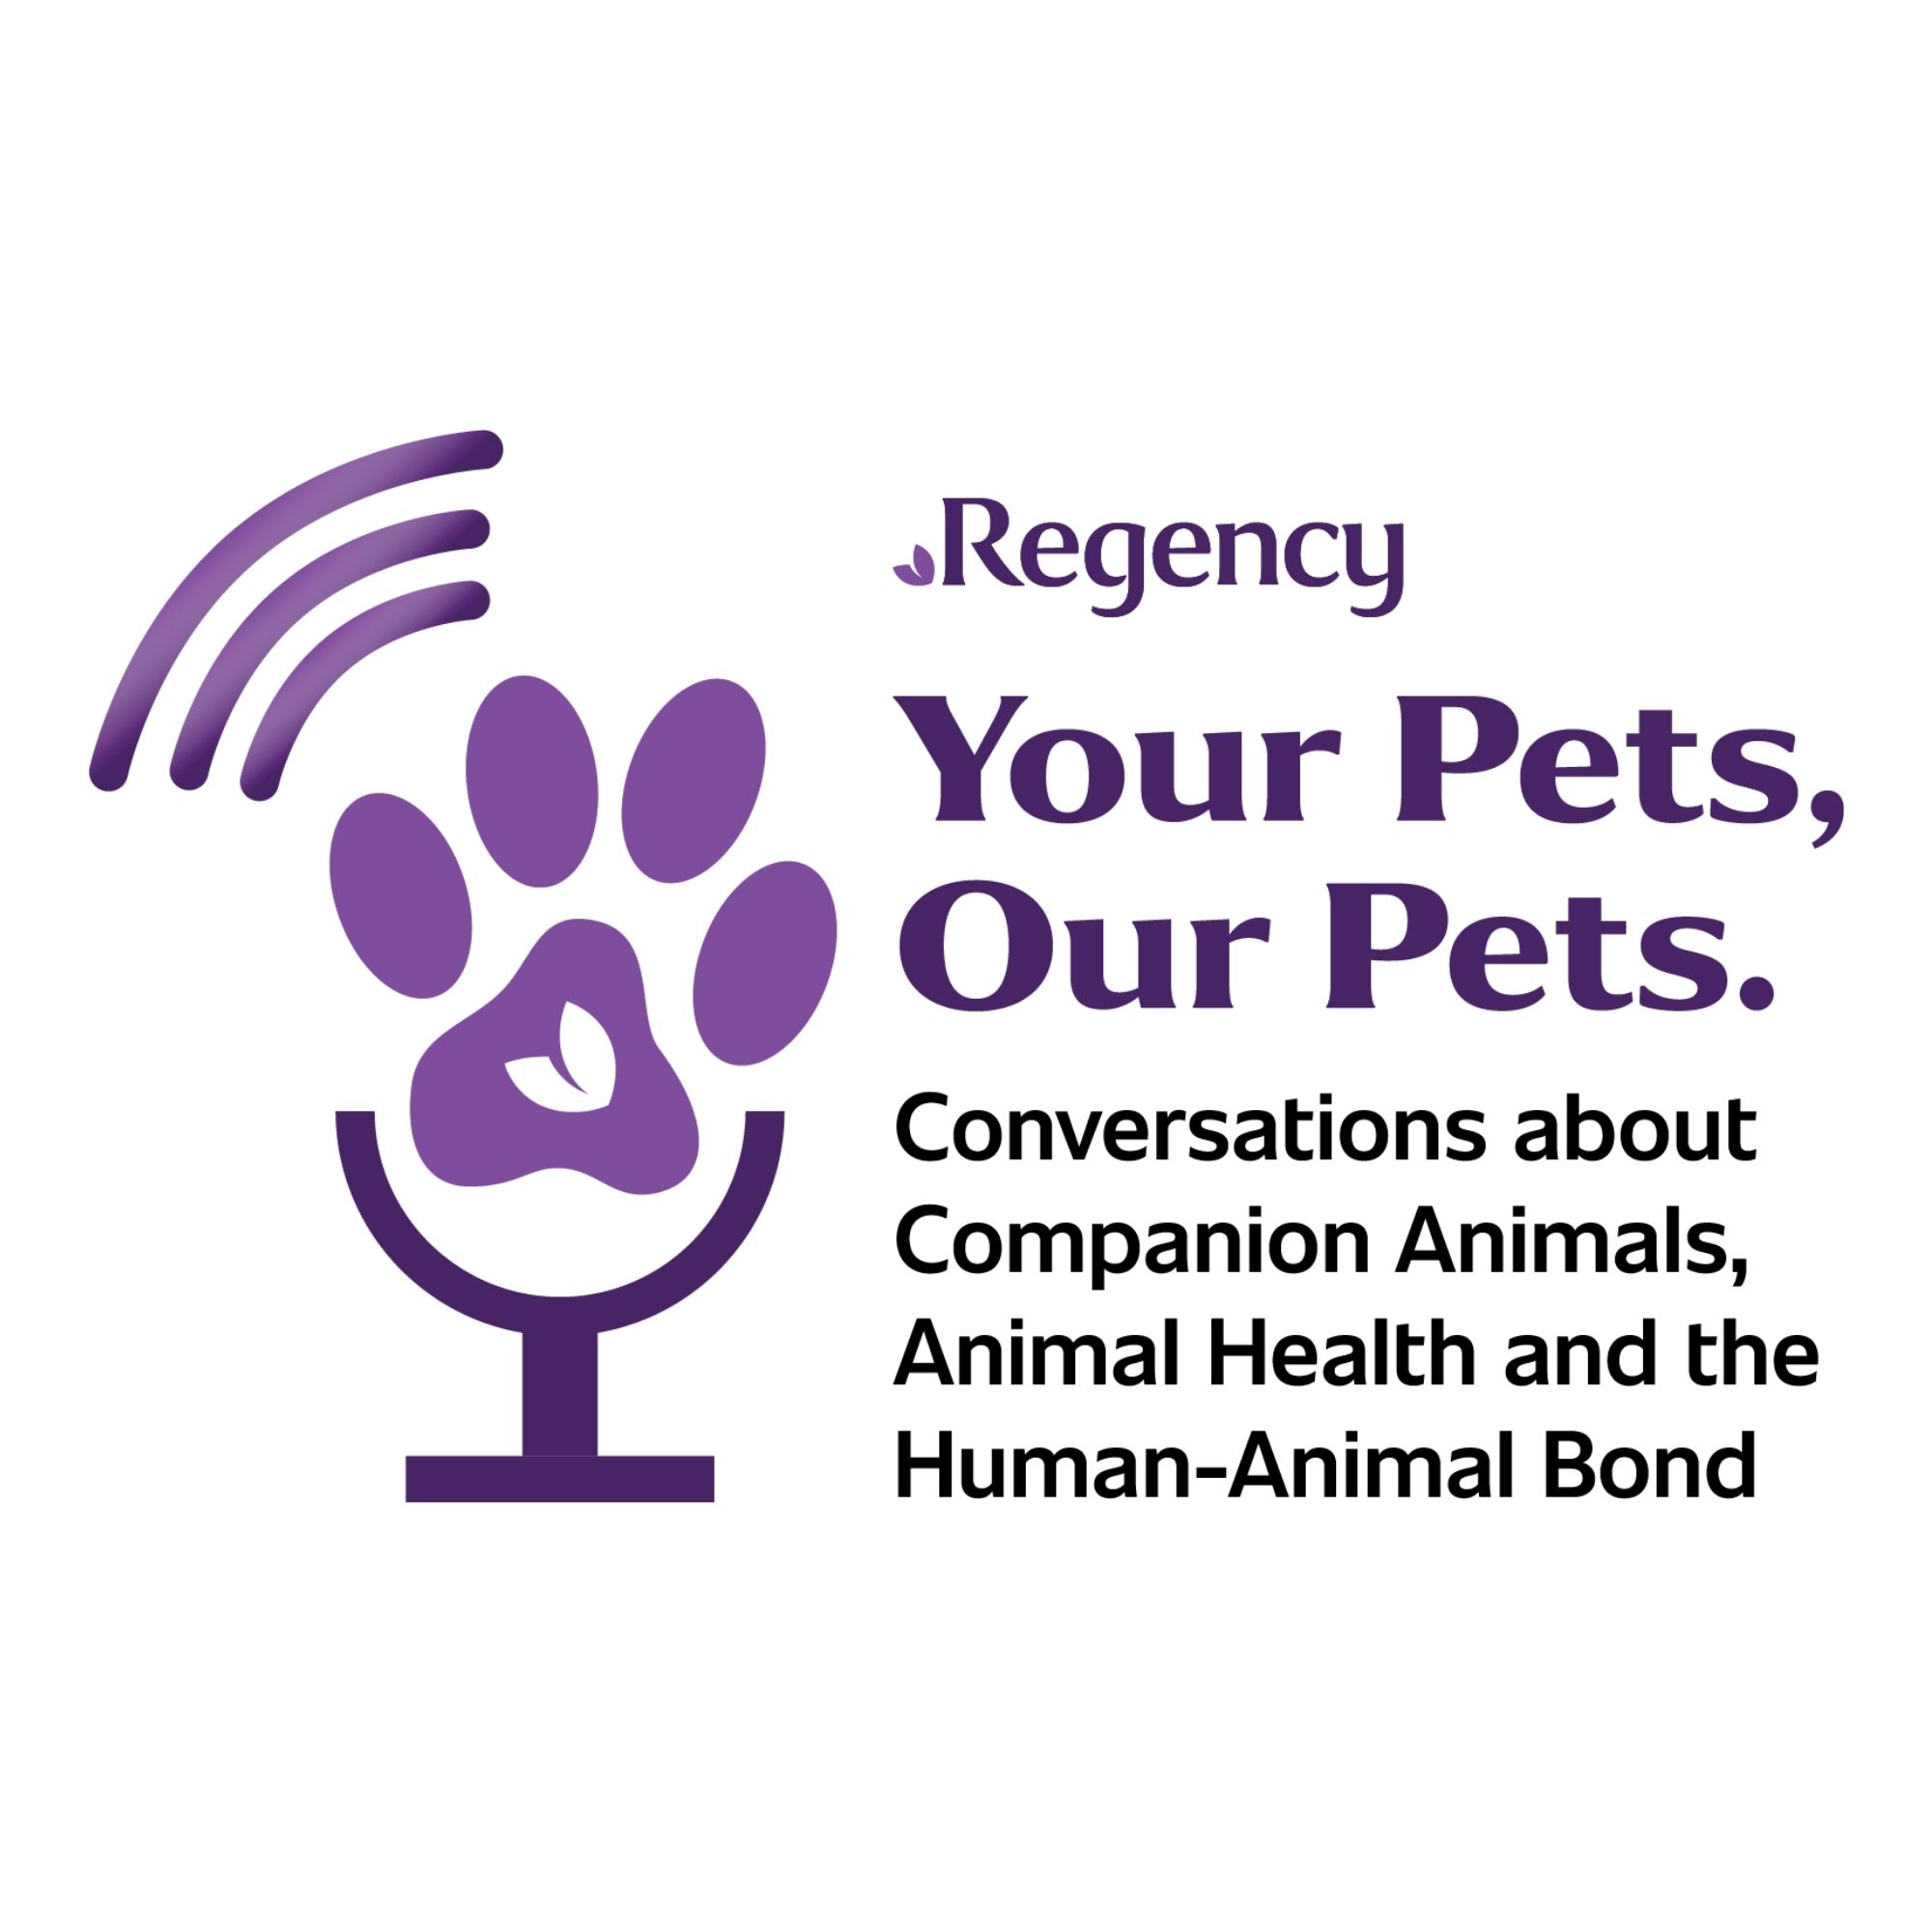 Your Pets, Our Pets: Conversations about companion animals, animal health, and the human-animal bond.